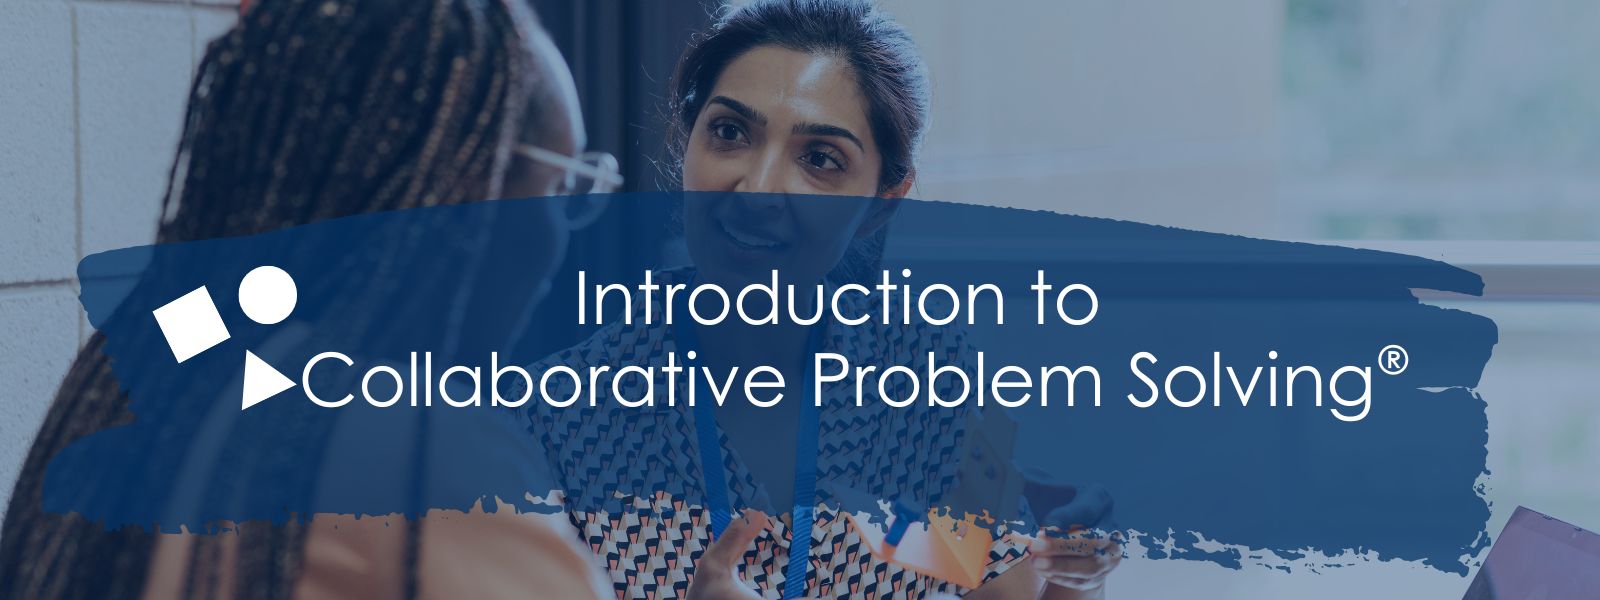 Introduction to Collaborative Problem Solving